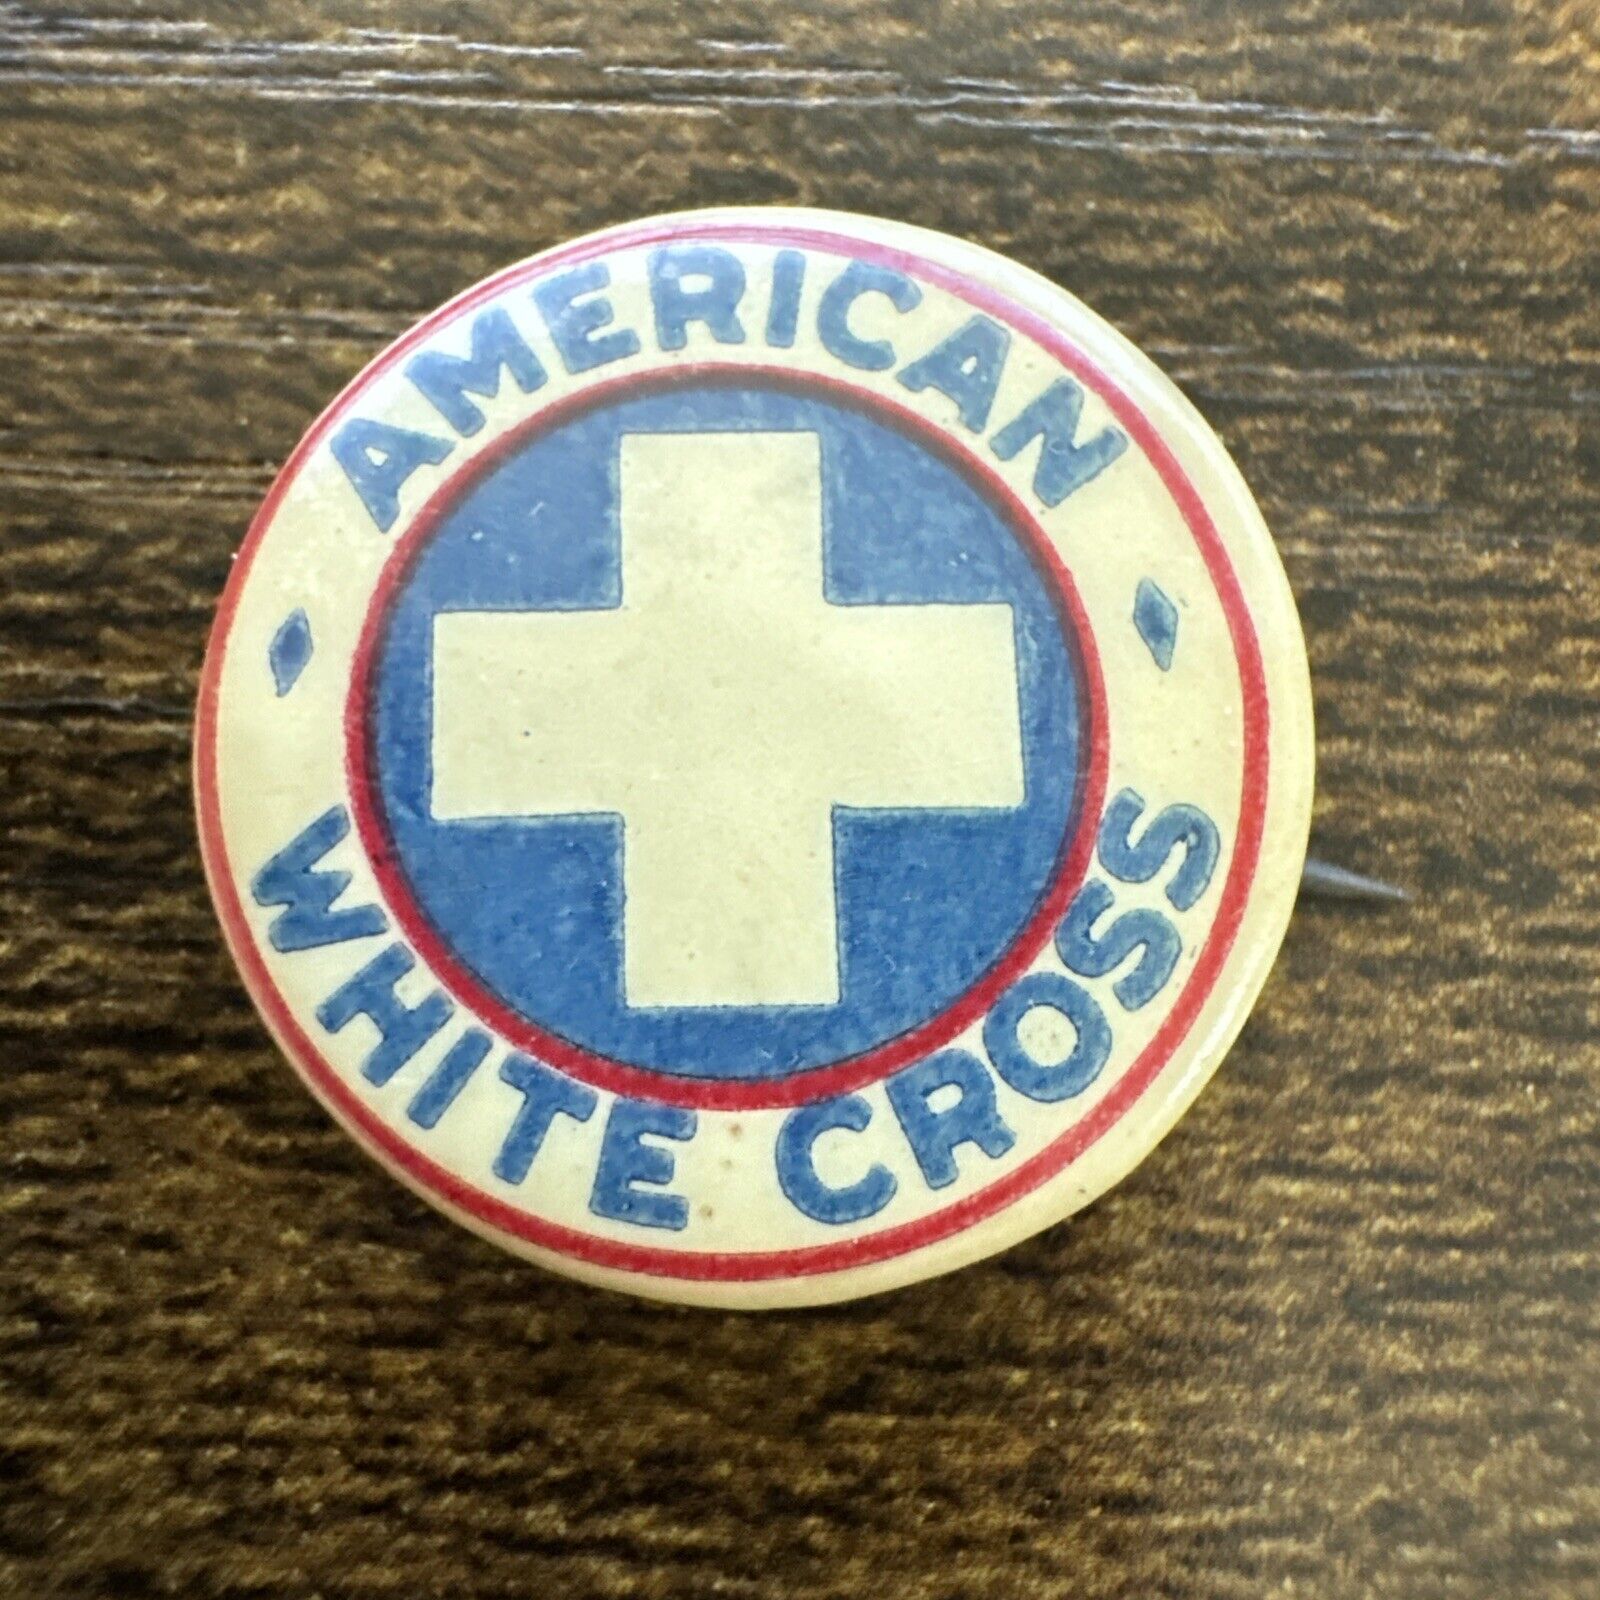 American White Cross Celluloid Pinback Button - St Louis Button Co Early 1900s